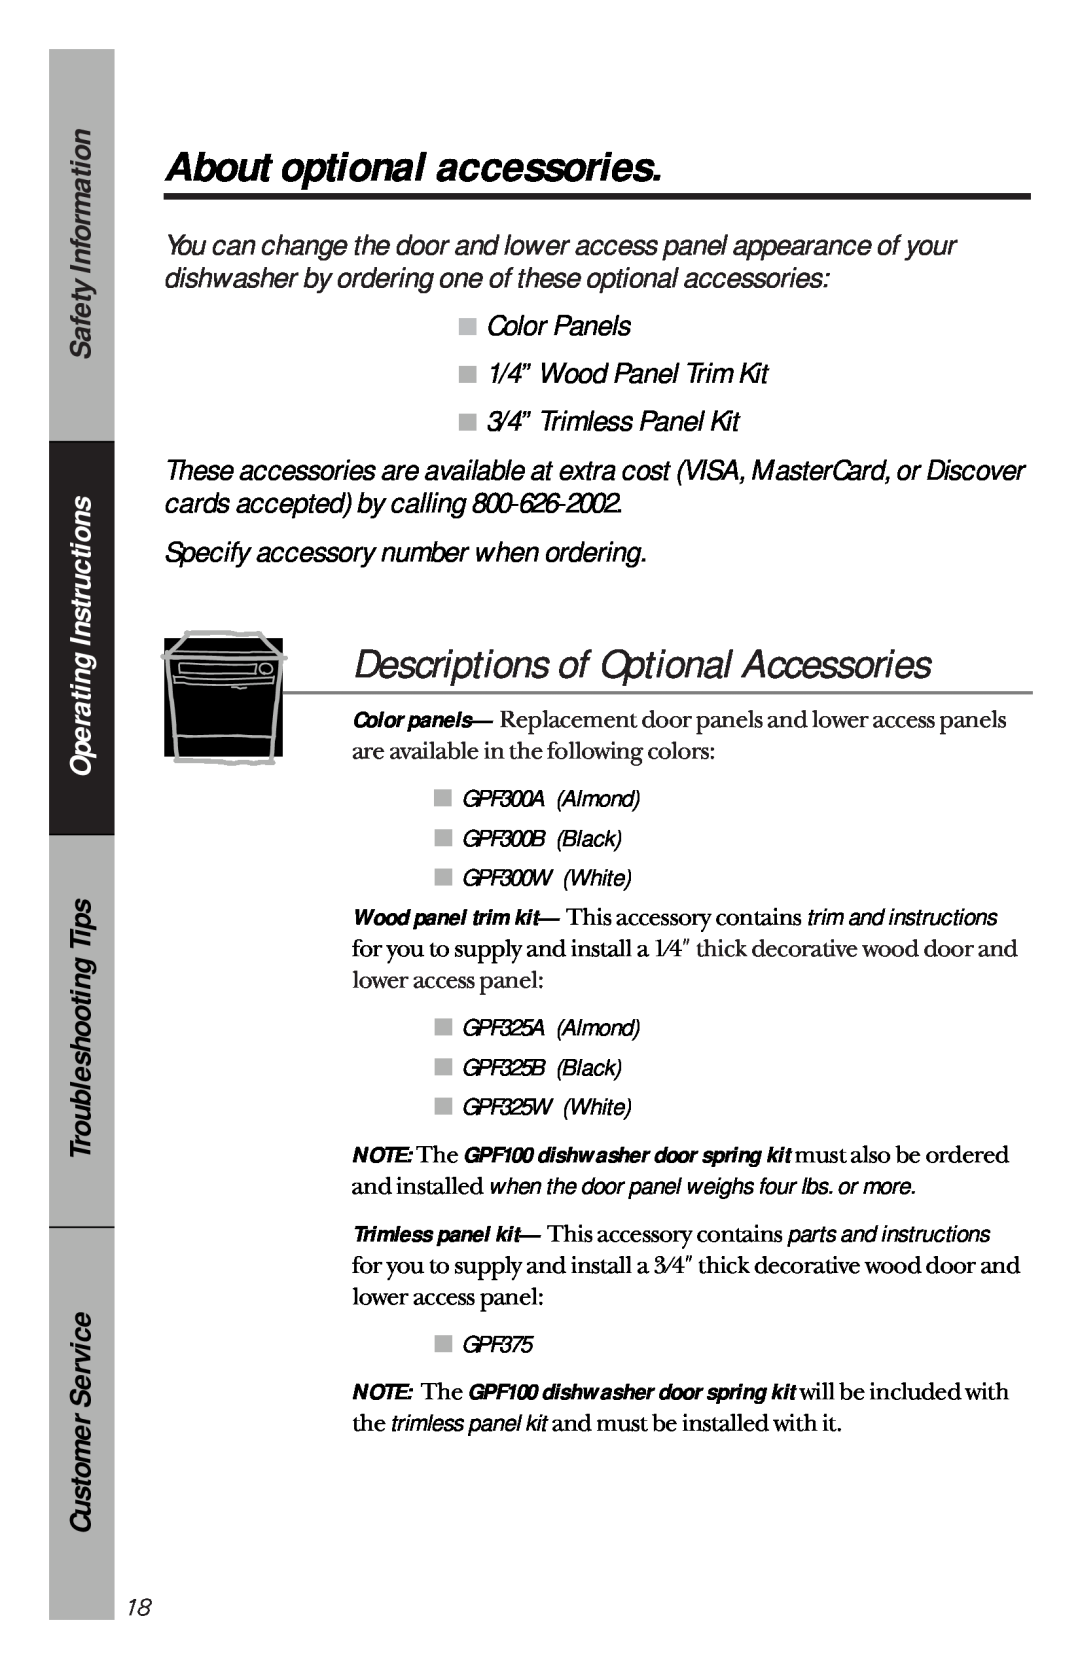 RCA PSD3230 About optional accessories, Descriptions of Optional Accessories, Color Panels 1/4” Wood Panel Trim Kit 